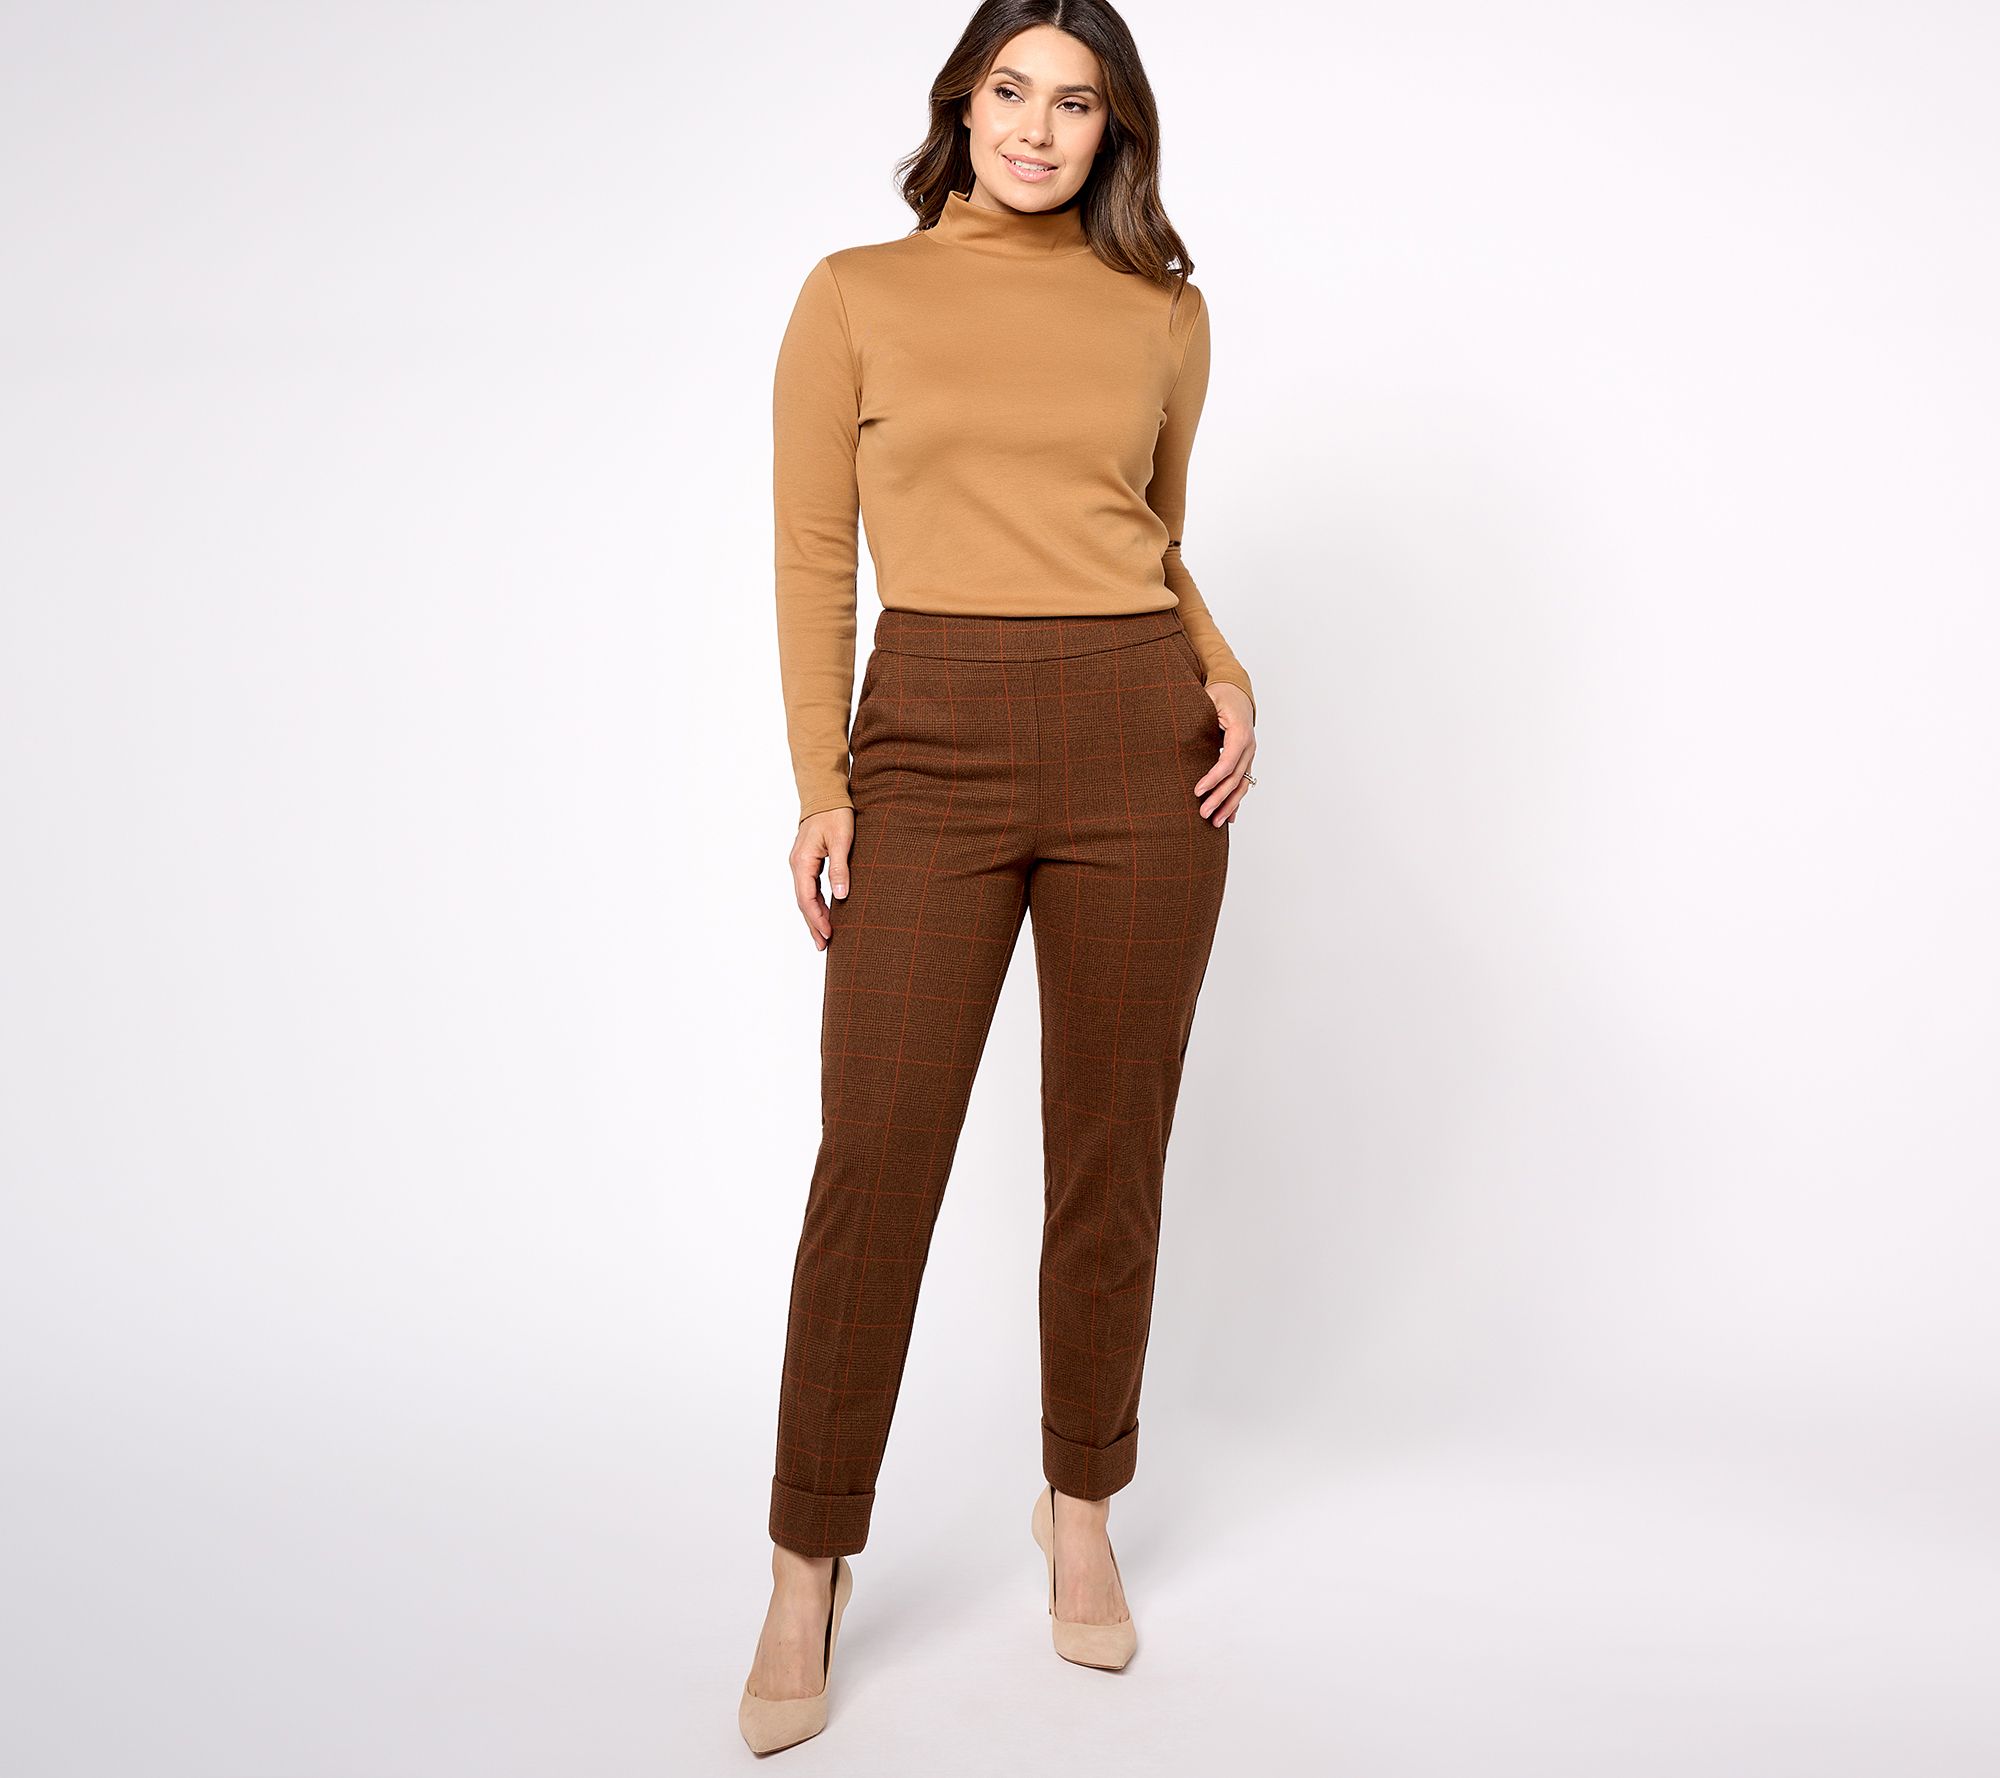 Red Wine Sipping High Waist Tweed Pants • Impressions Online Boutique